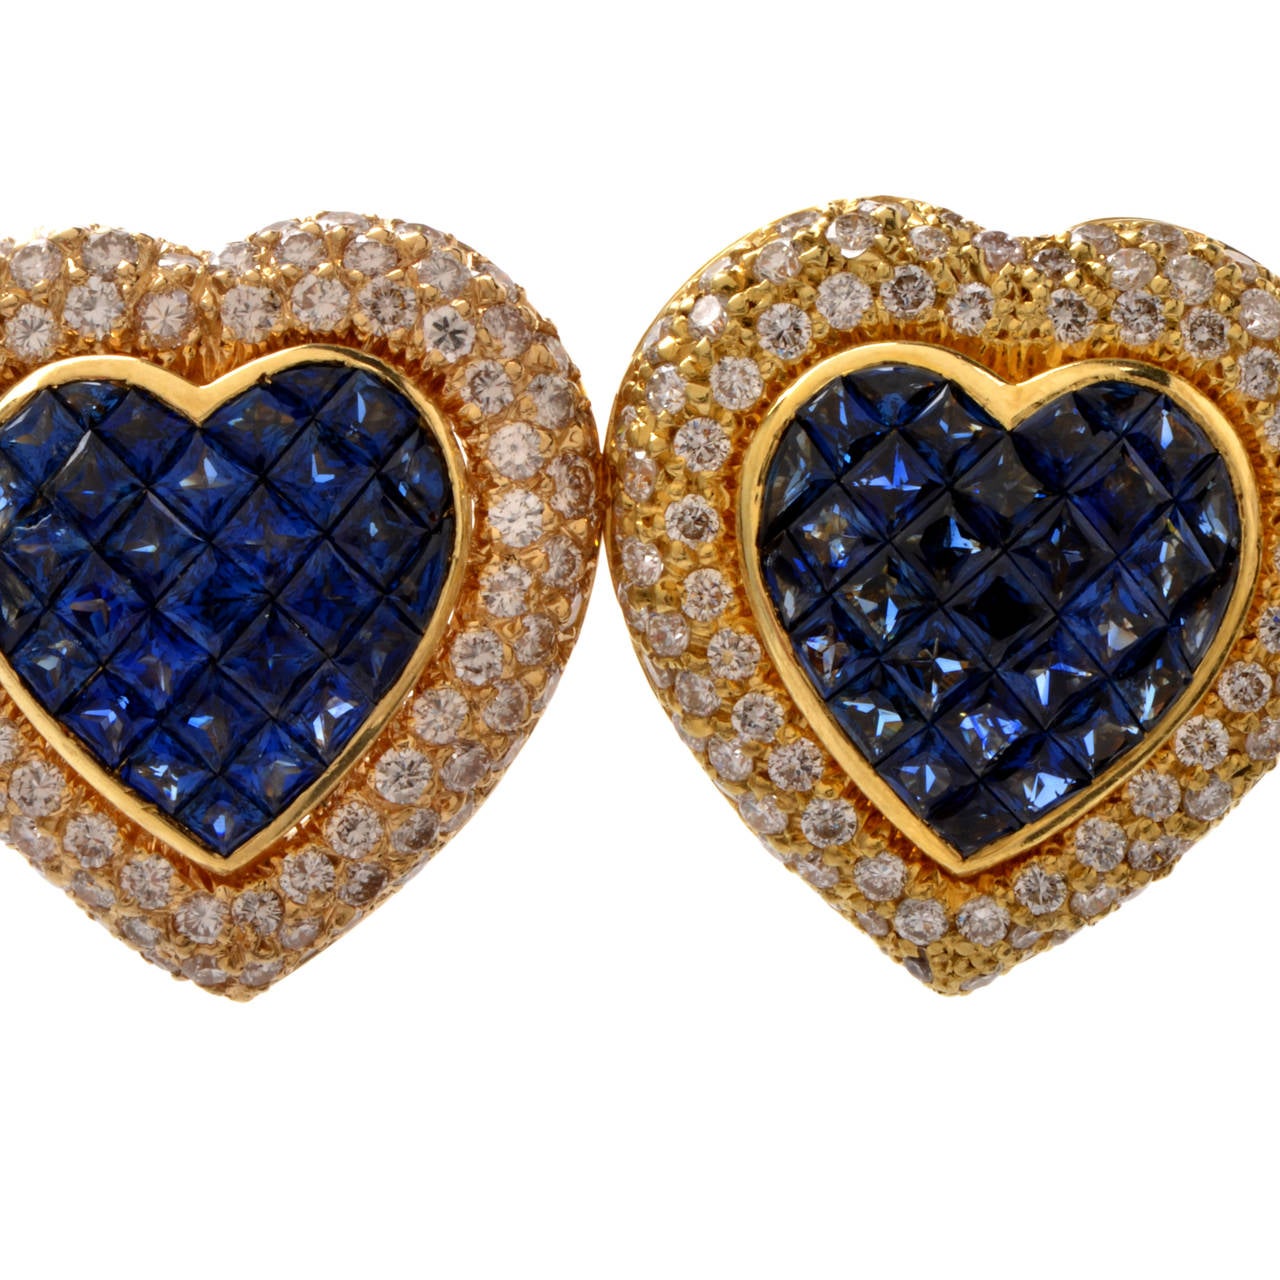 These estate heart earrings with sapphires and diamonds are crafted in and stamped with solid 18K yellow gold and weigh approx. 22.2 grams. Designed as a pair of color-contrasted heart-shaped profiles, these captivating earrings are adorned with 62